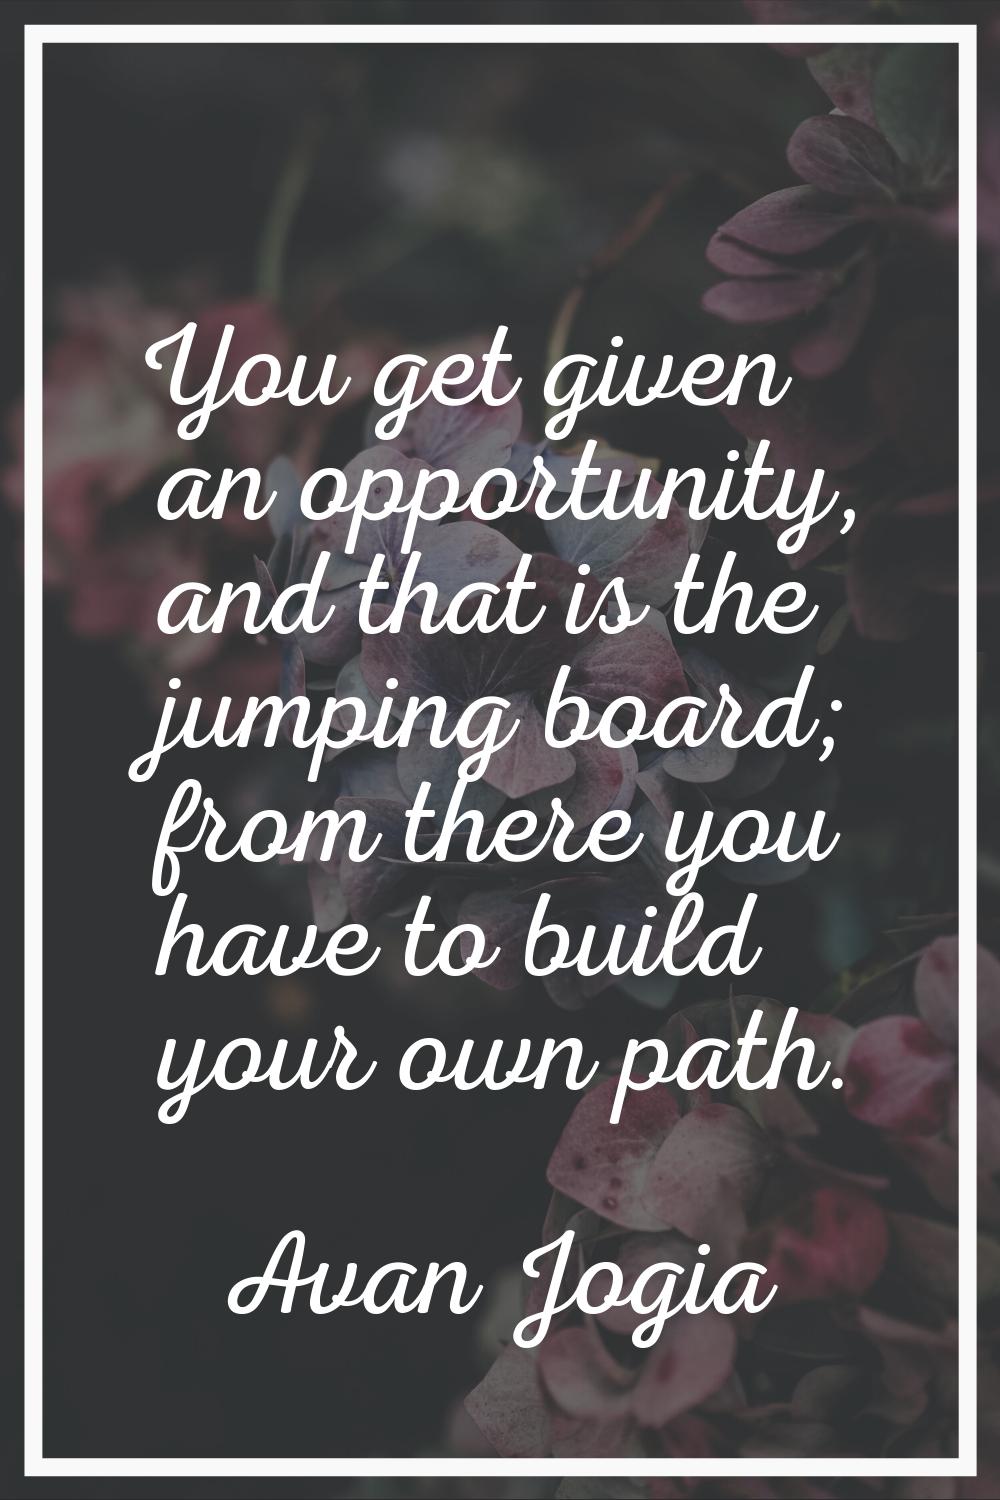 You get given an opportunity, and that is the jumping board; from there you have to build your own 